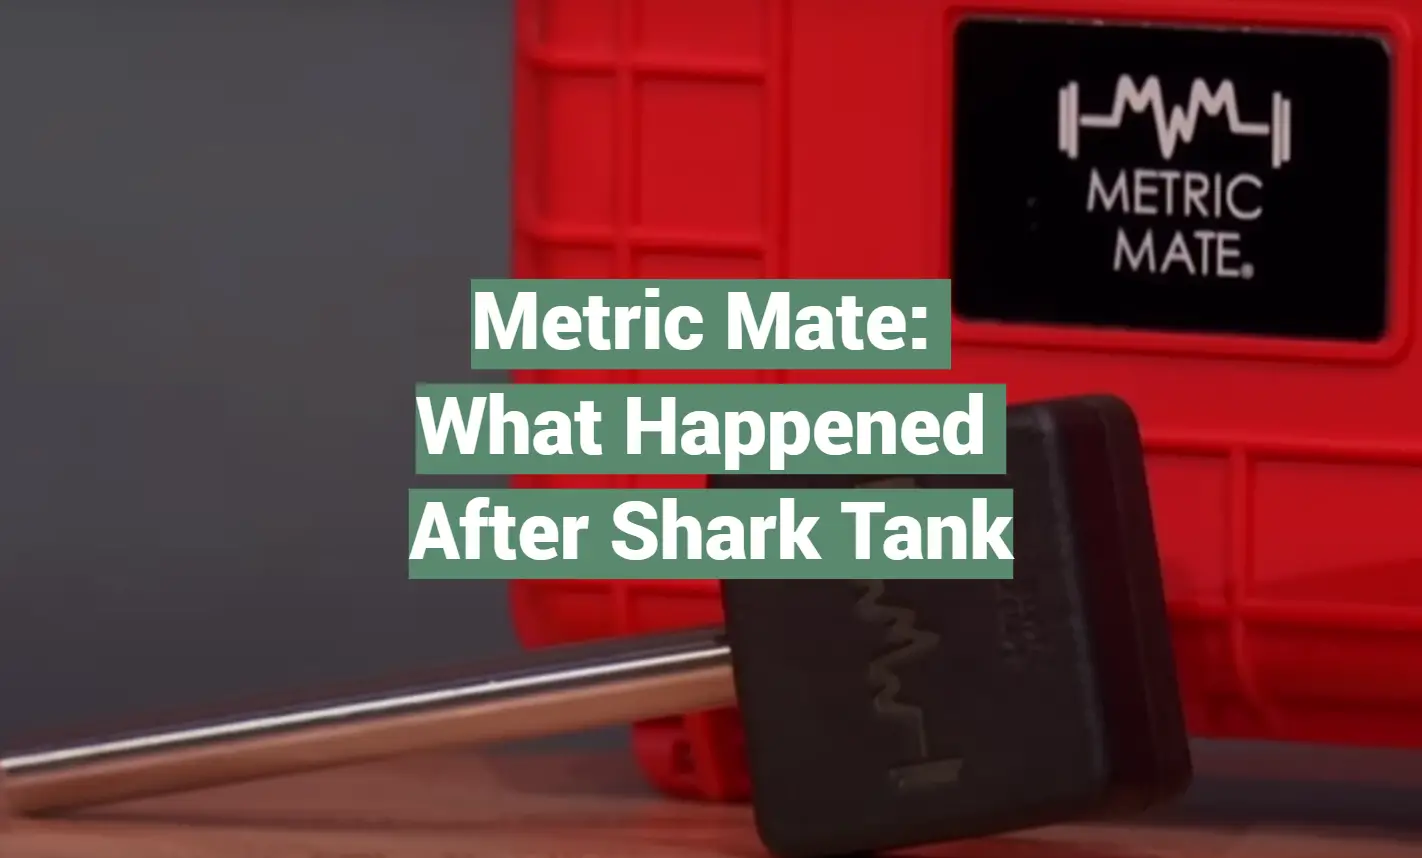 Metric Mate: What Happened After Shark Tank